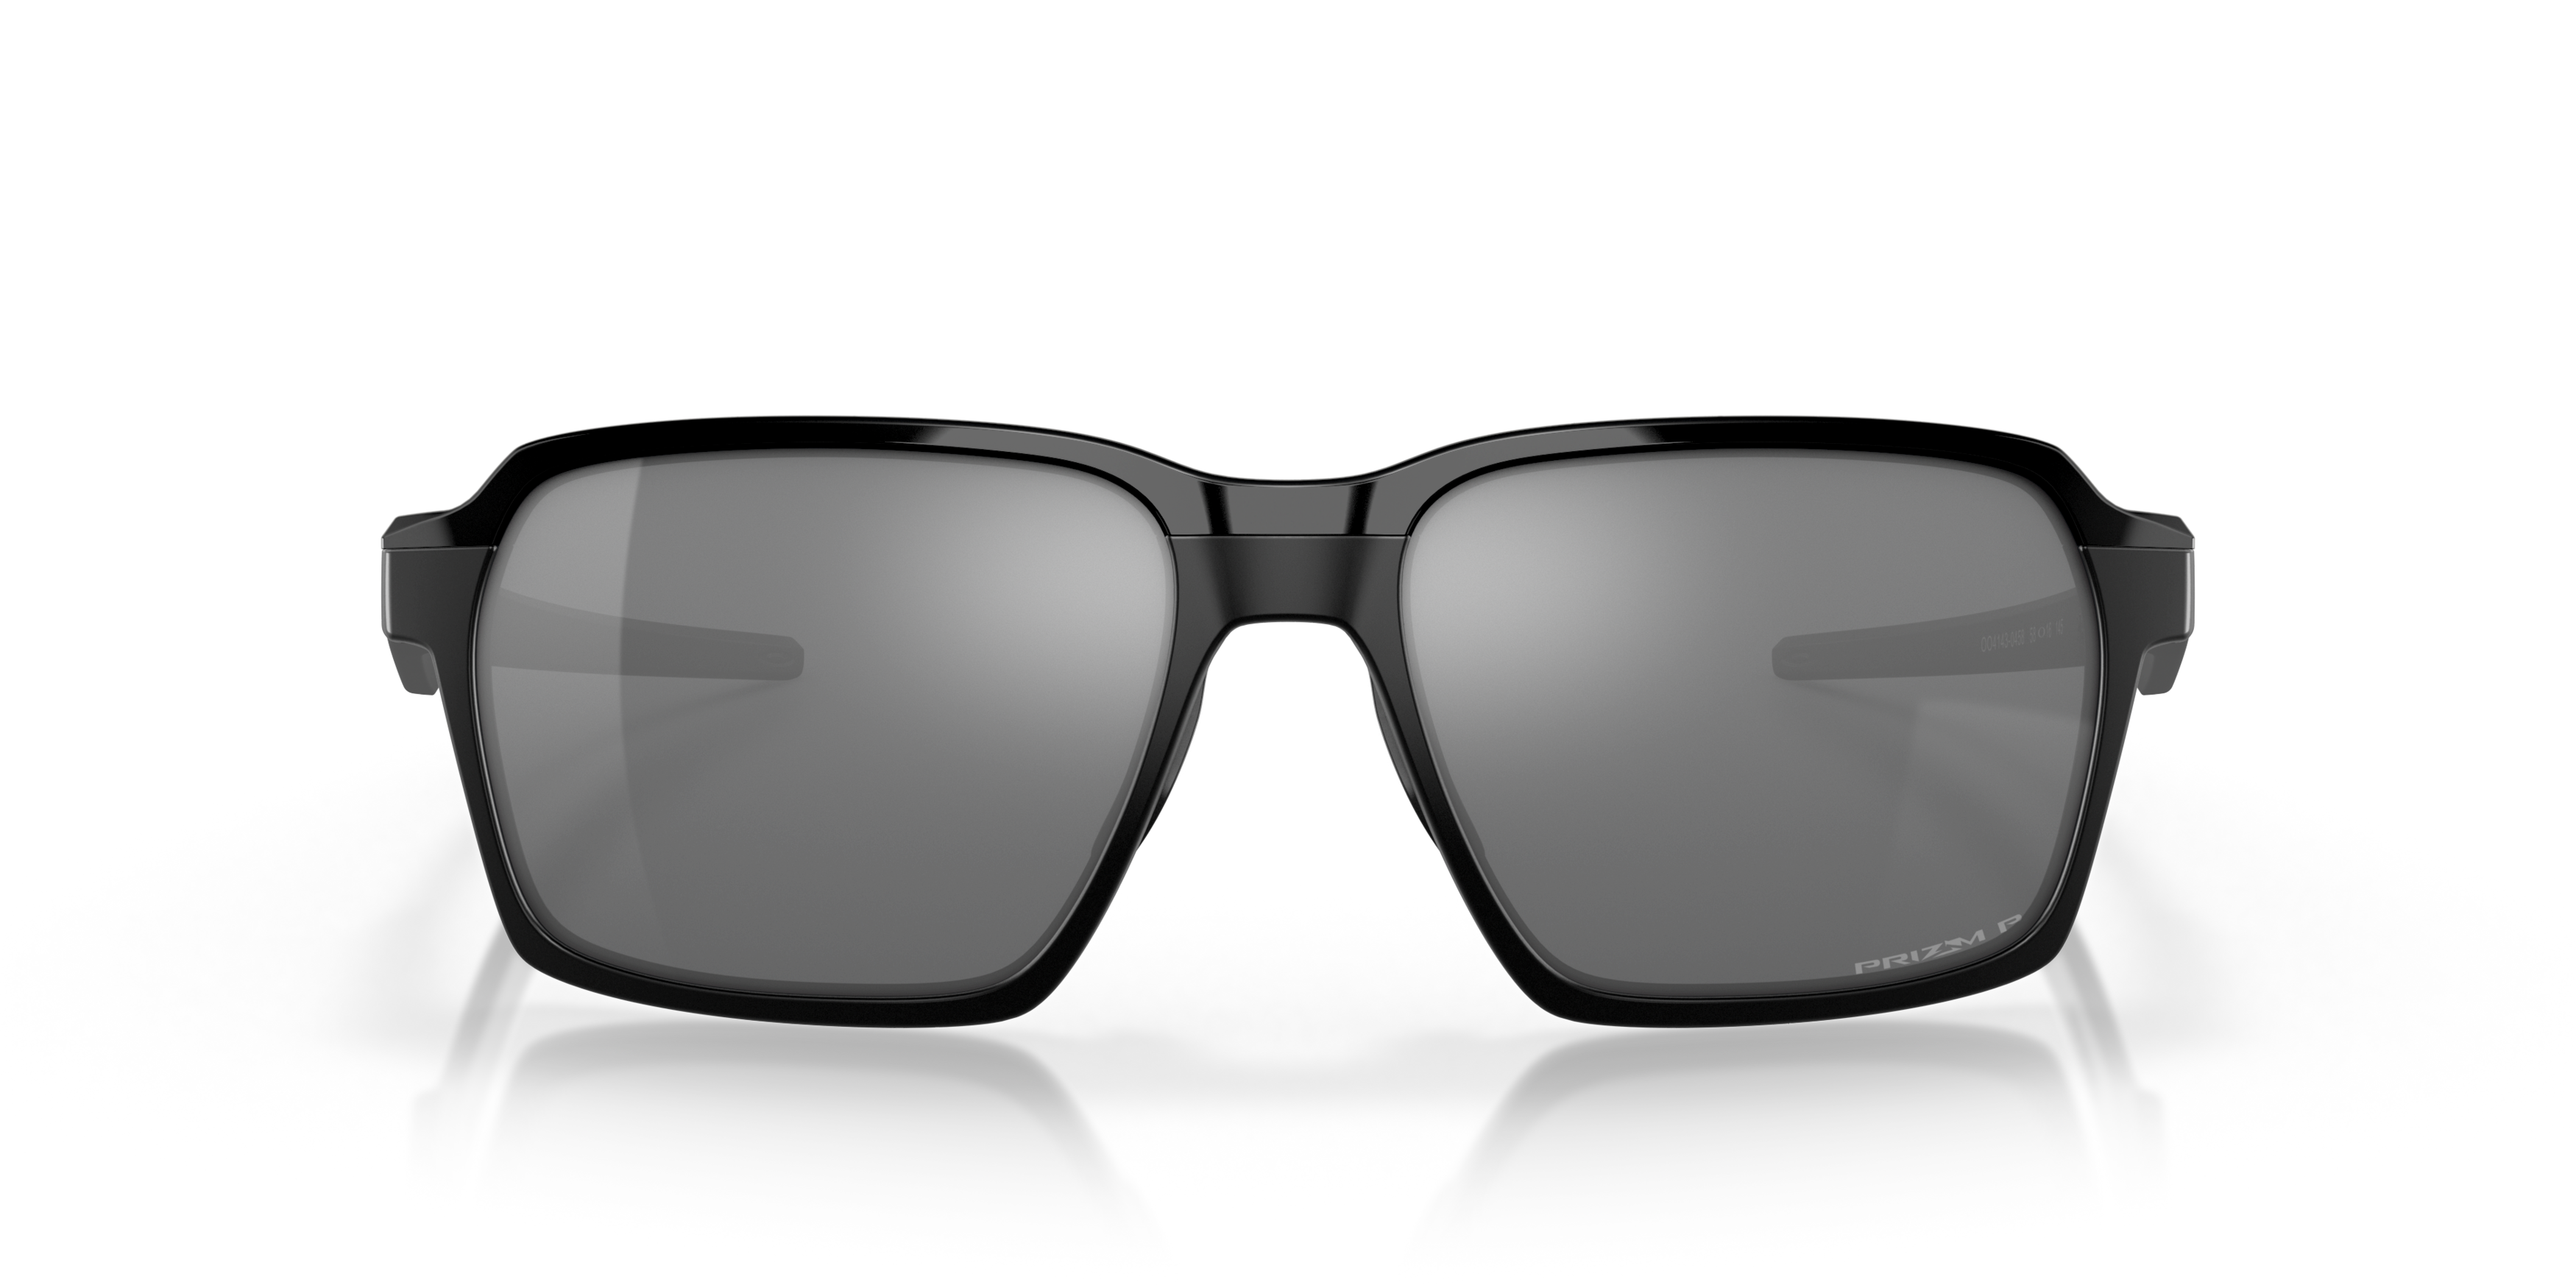 [products.image.front] OAKLEY OO4143 414304